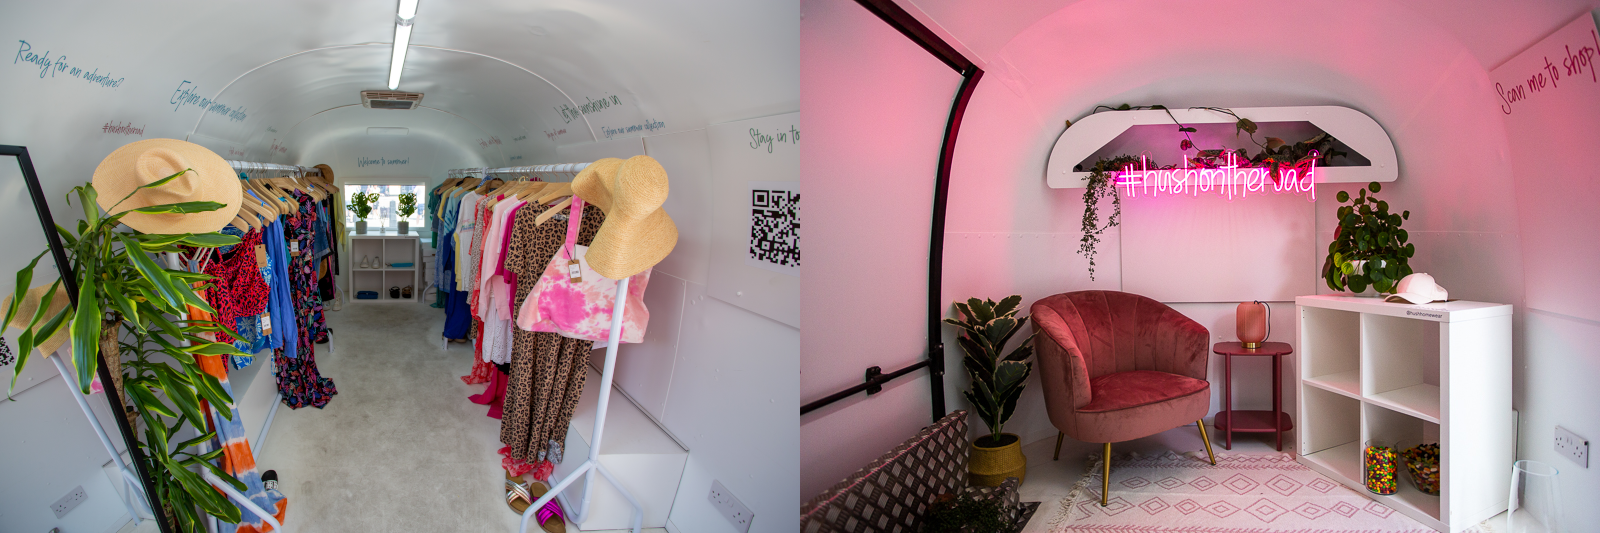 Vintage Airstream decorated and branded interior